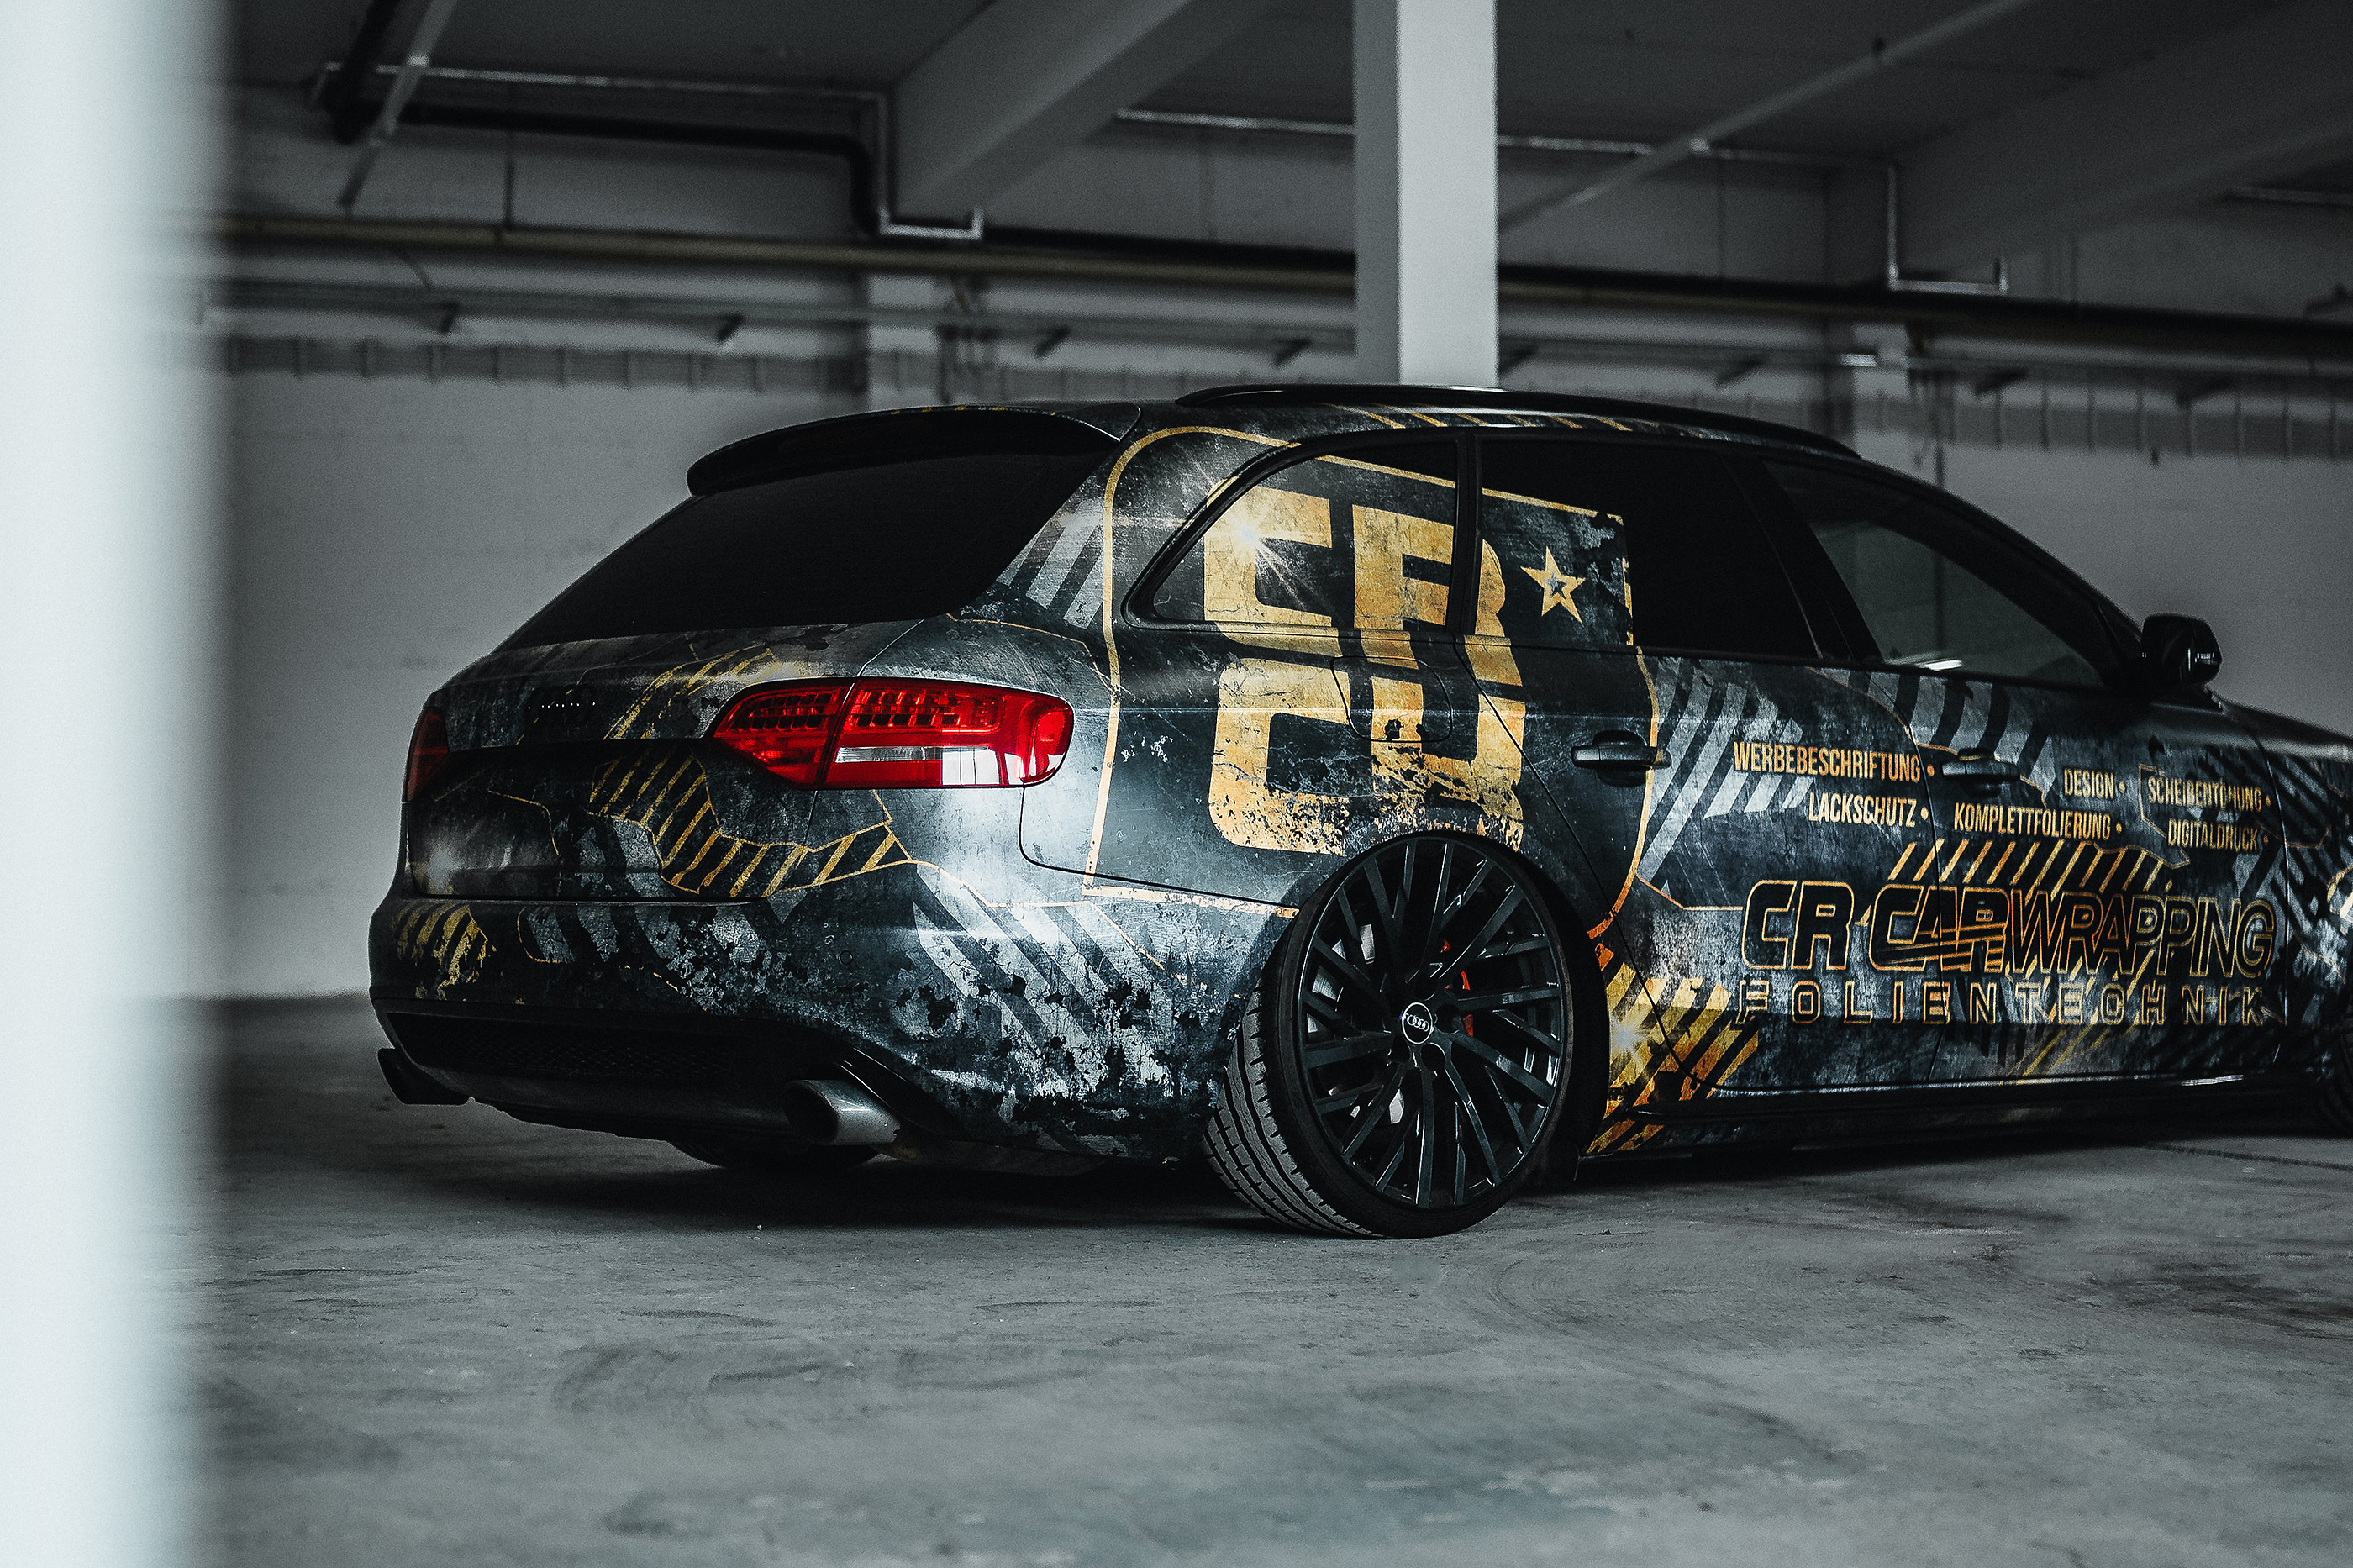 ? Audi A4 CRCarwrapping ?